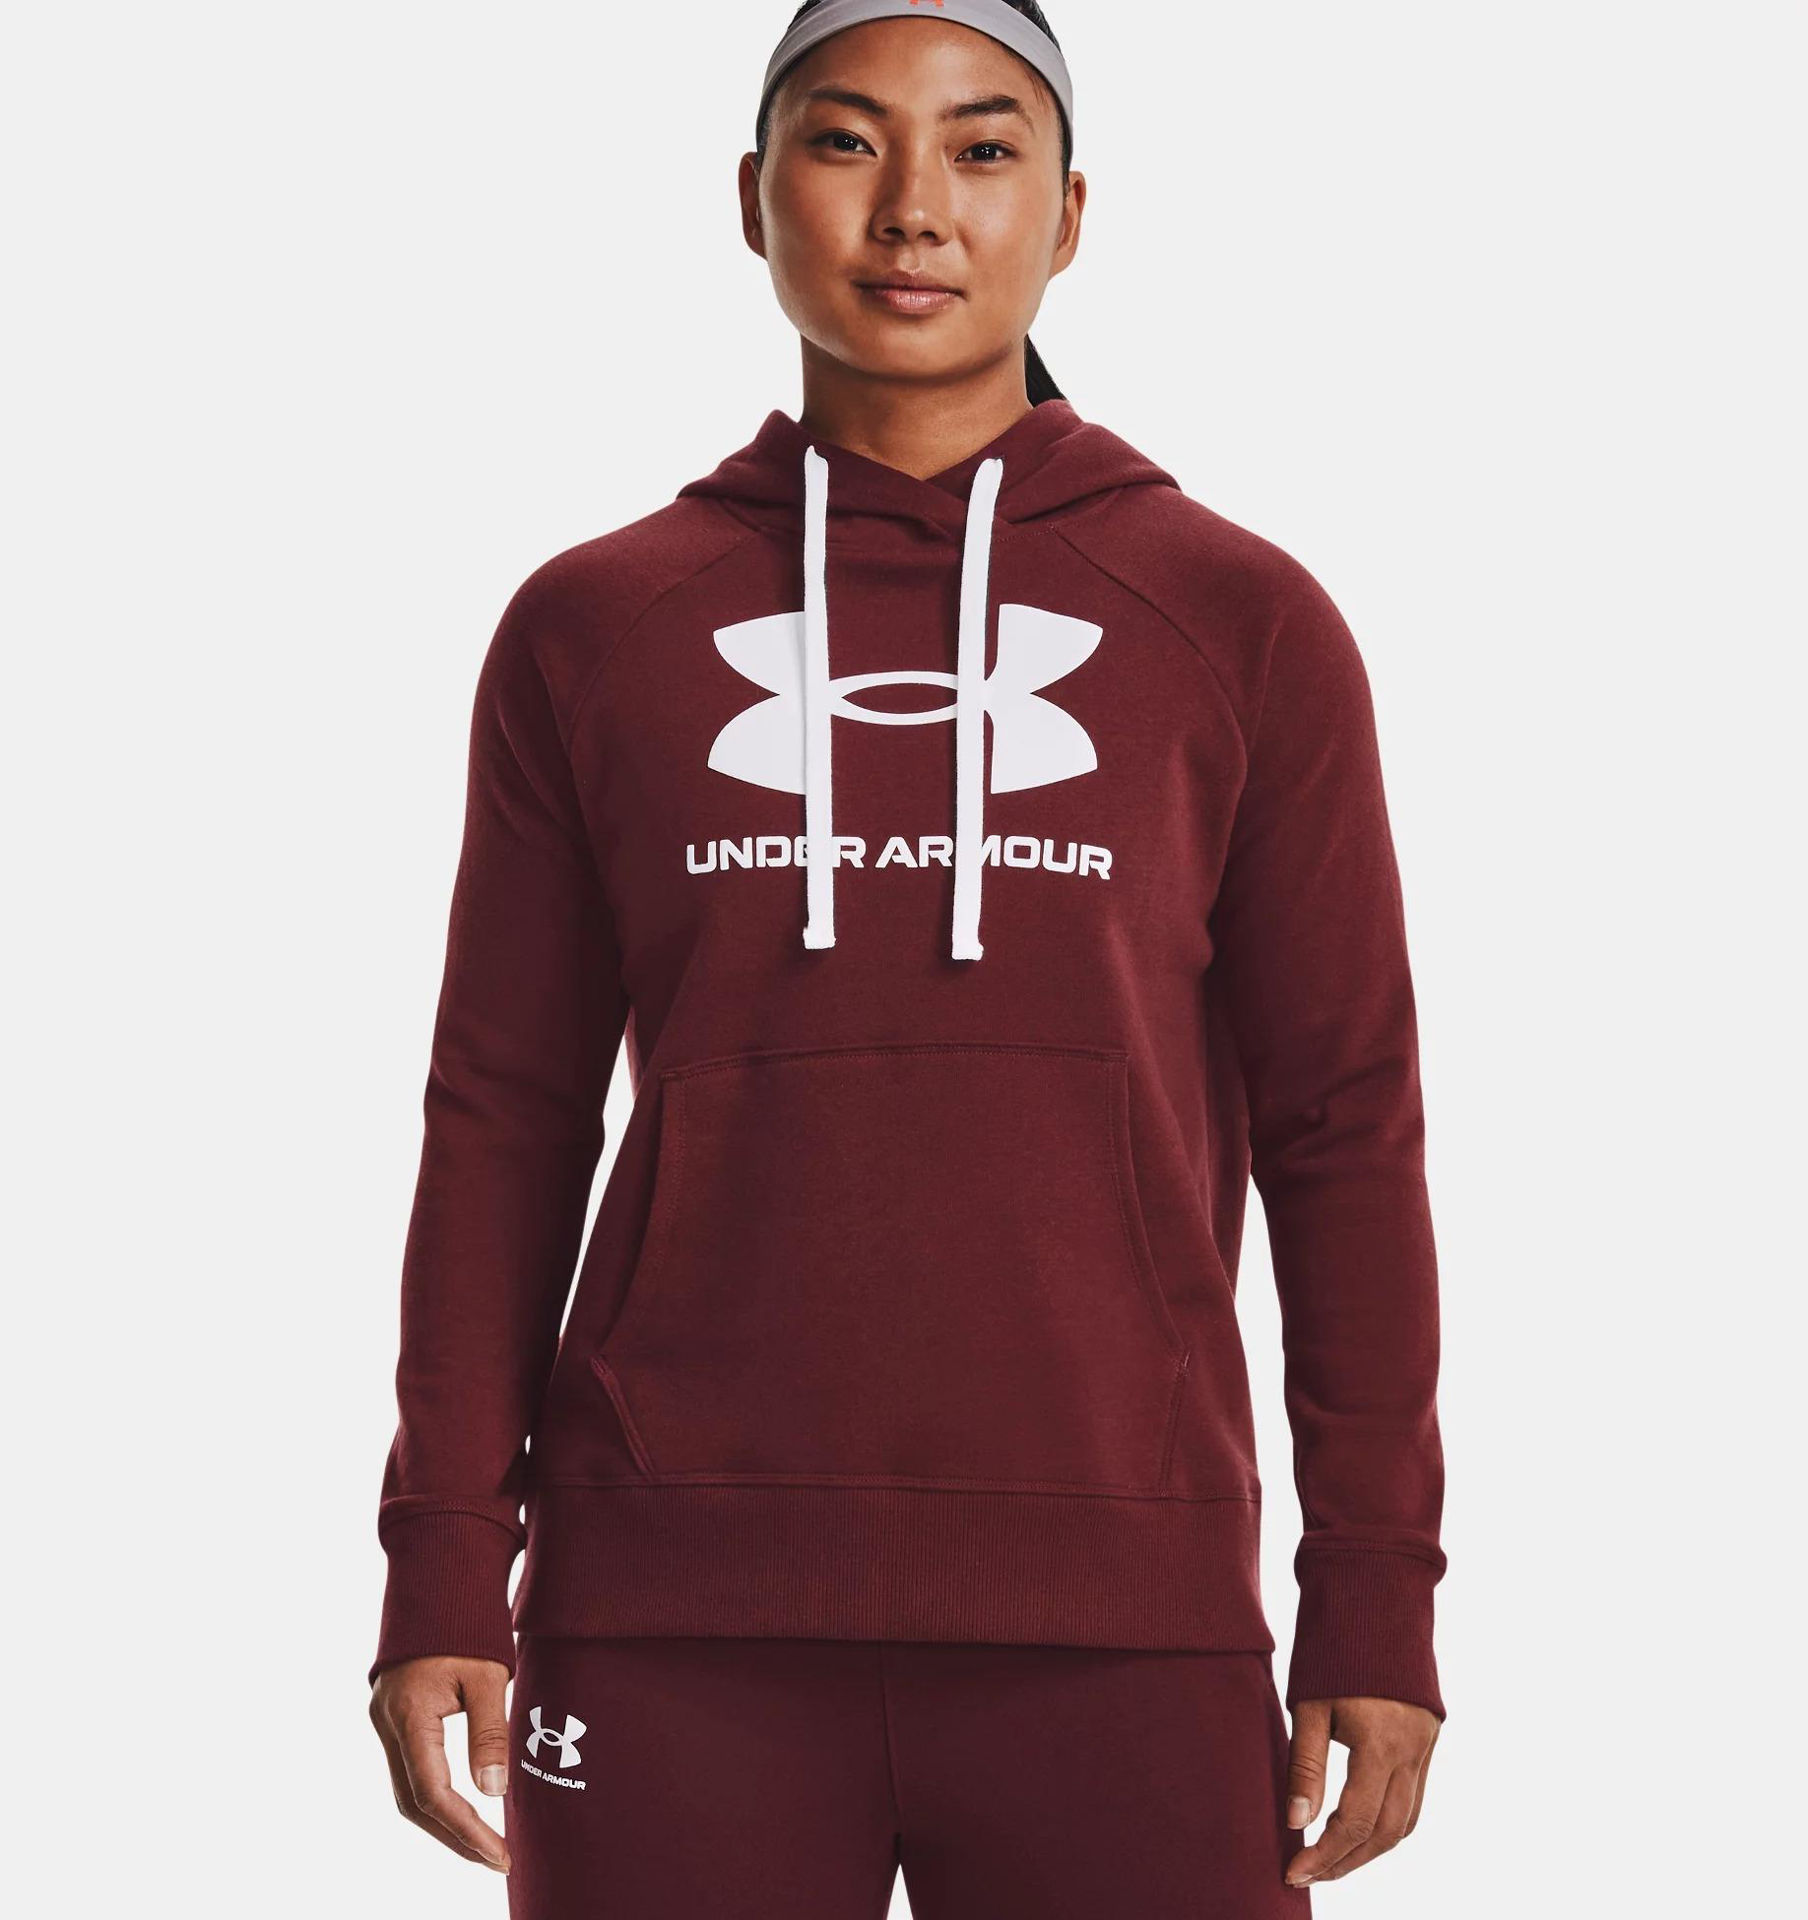 Picture of RIVAL FLEECE LOGO HOODIE  XS Burgundy